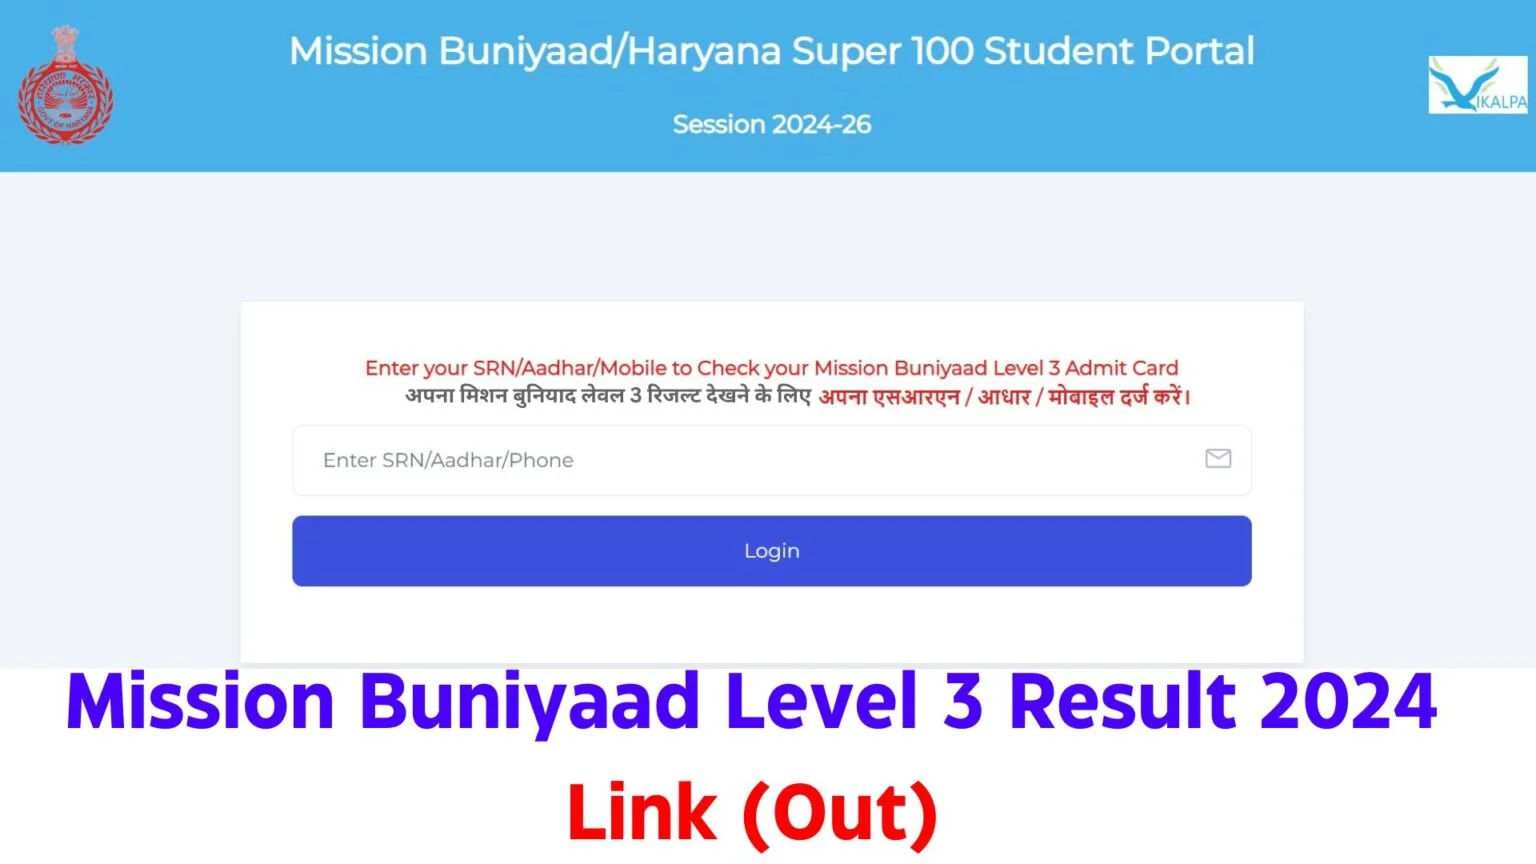 Mission Buniyaad Level 3 Result 2024 Link Out